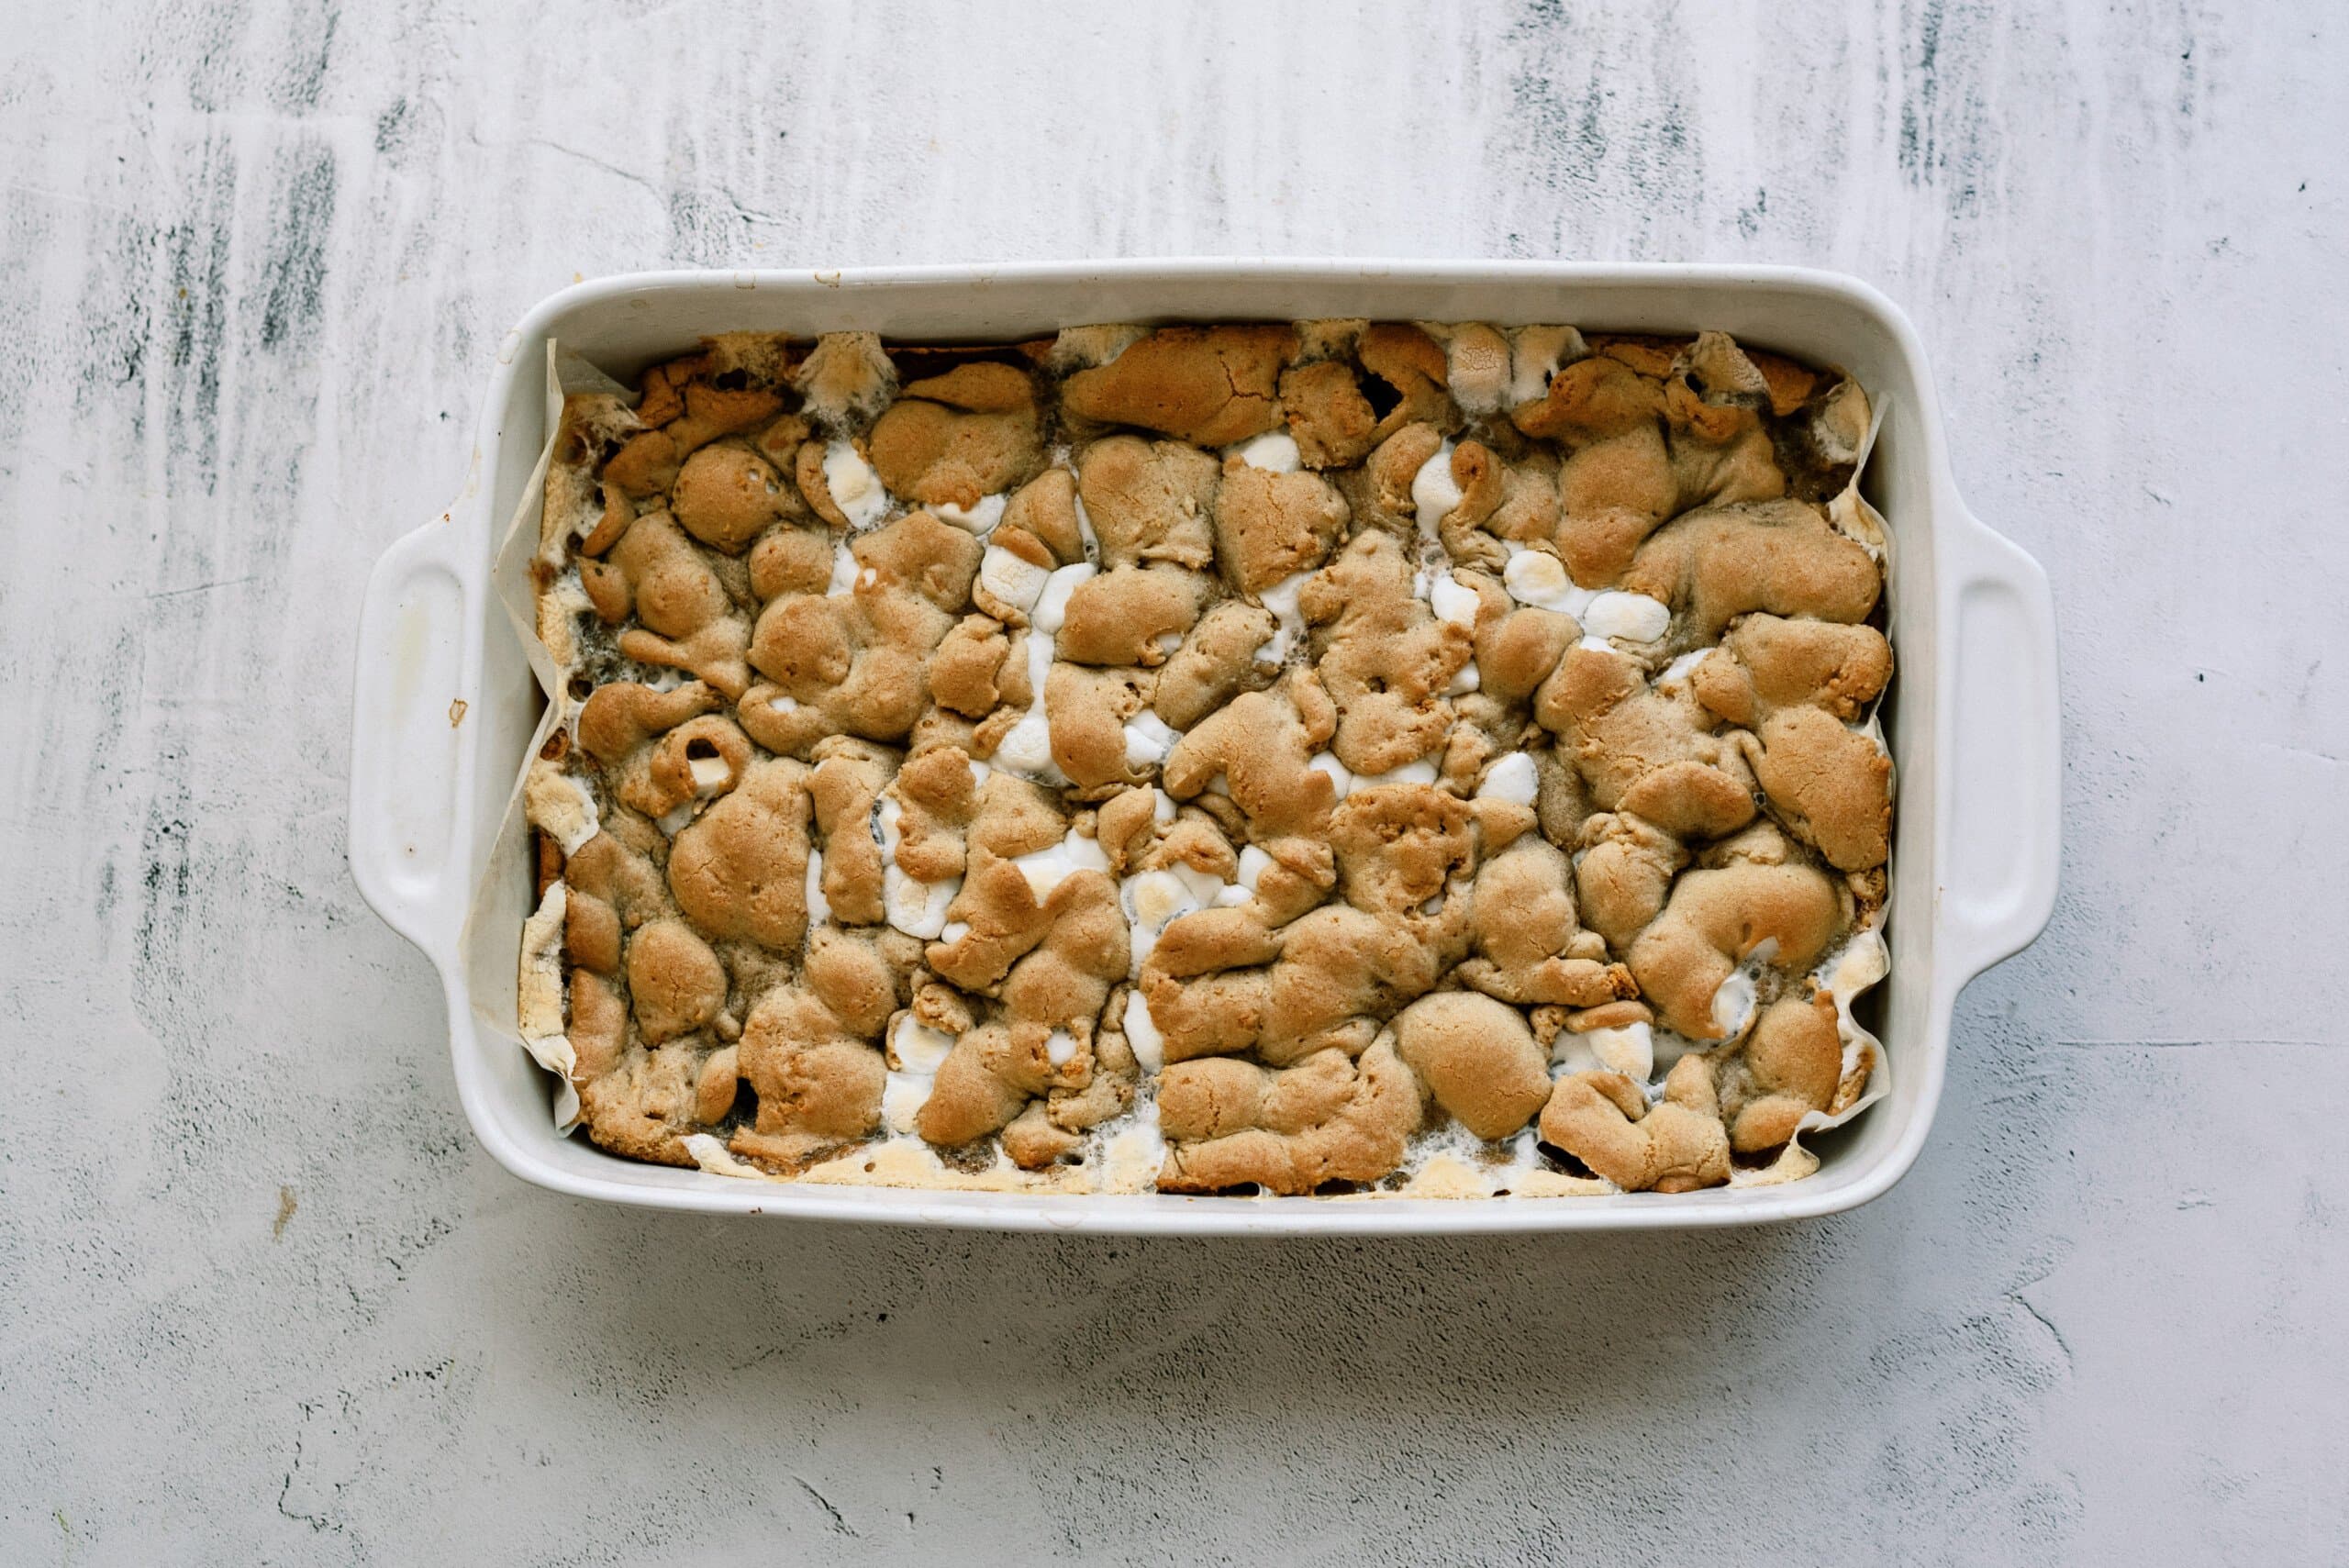 baked smores bars in a baking dish